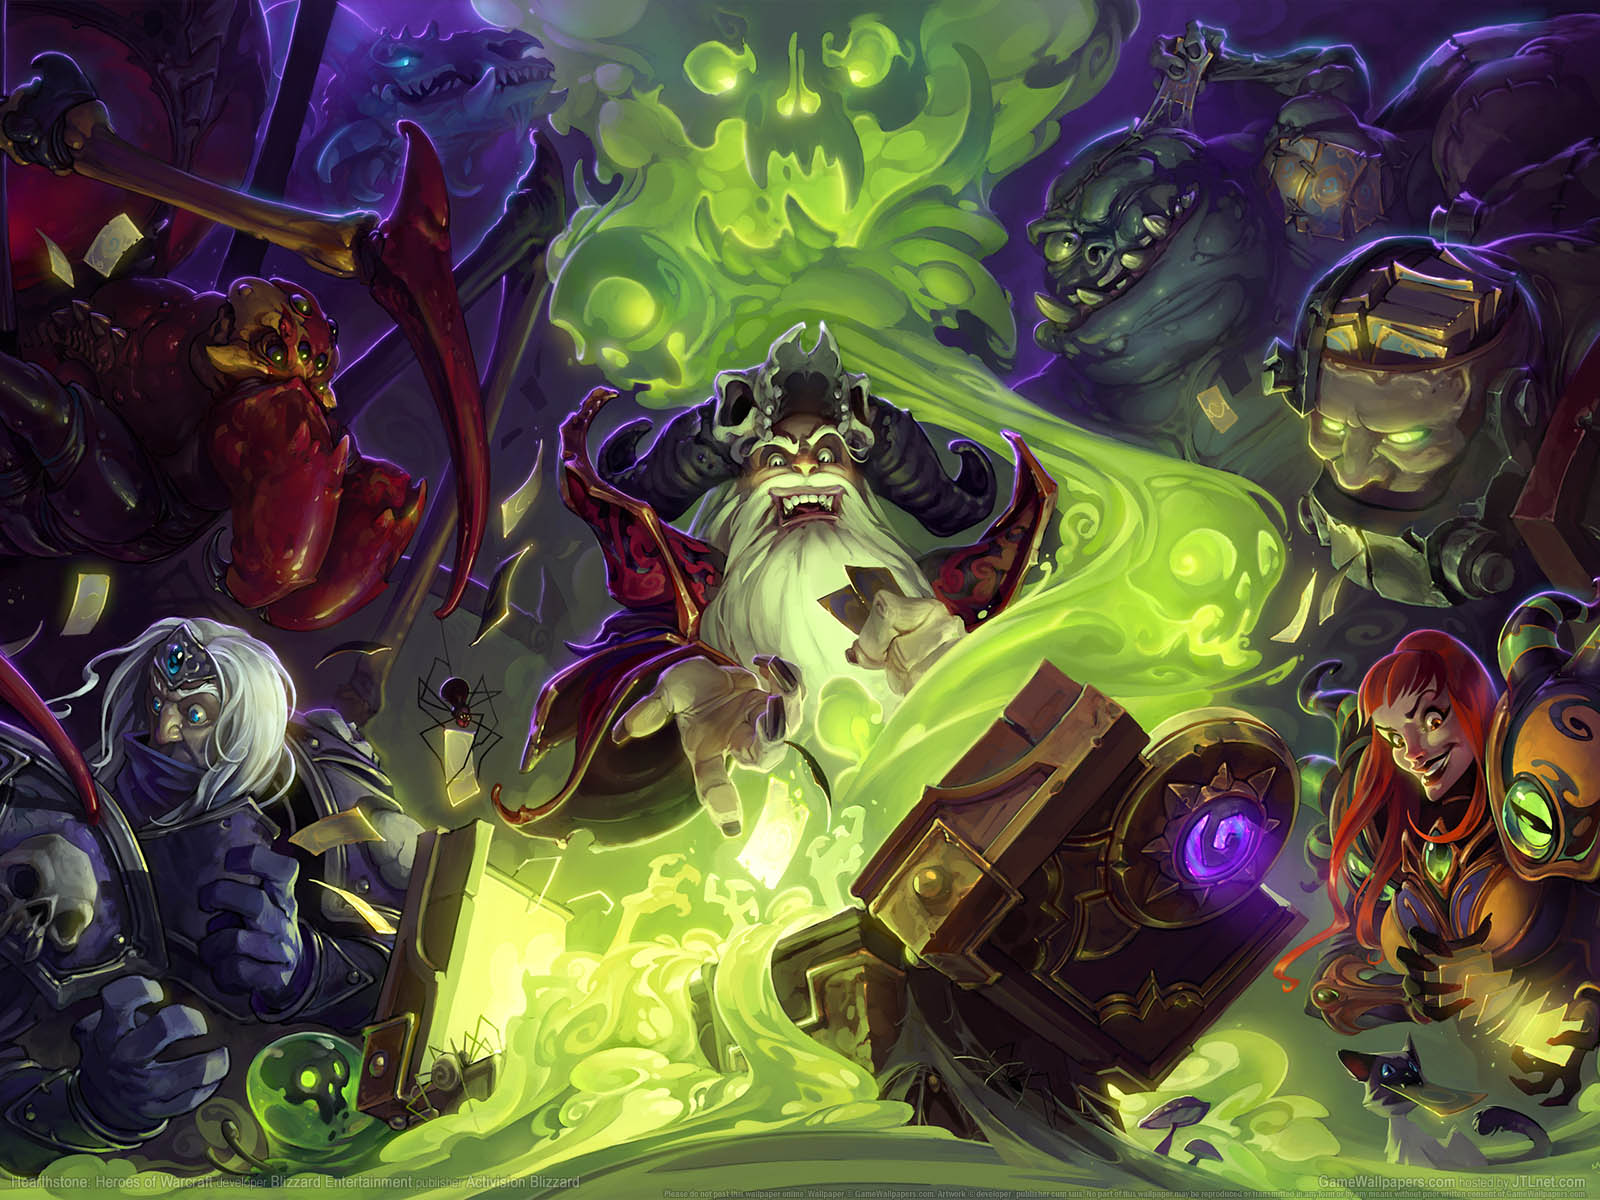 Hearthstone%3A Heroes of Warcraft wallpaper 08 1600x1200